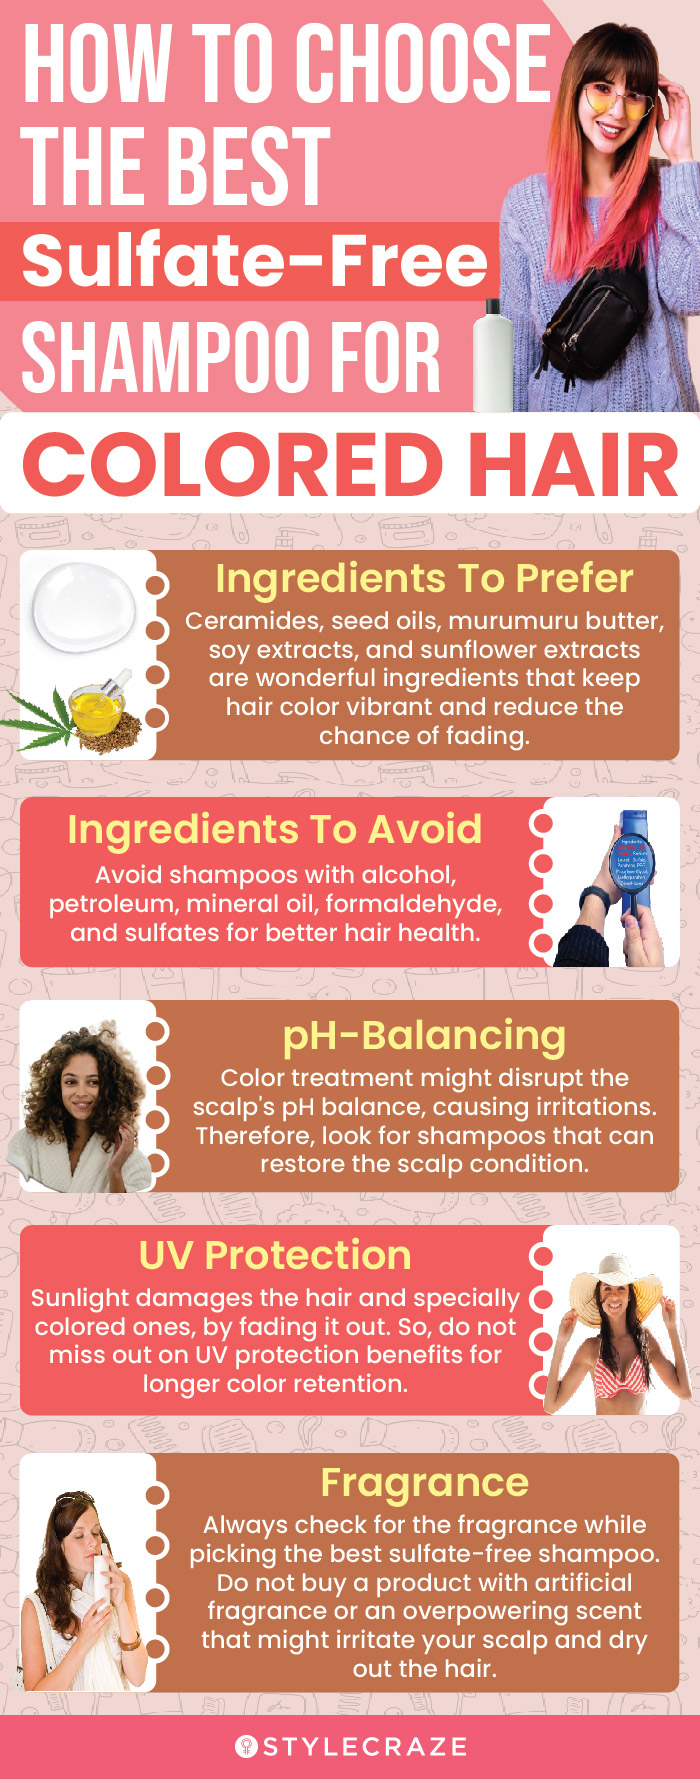 How To Choose The Best Sulfate-Free Shampoo For Colored Hair (infographic)